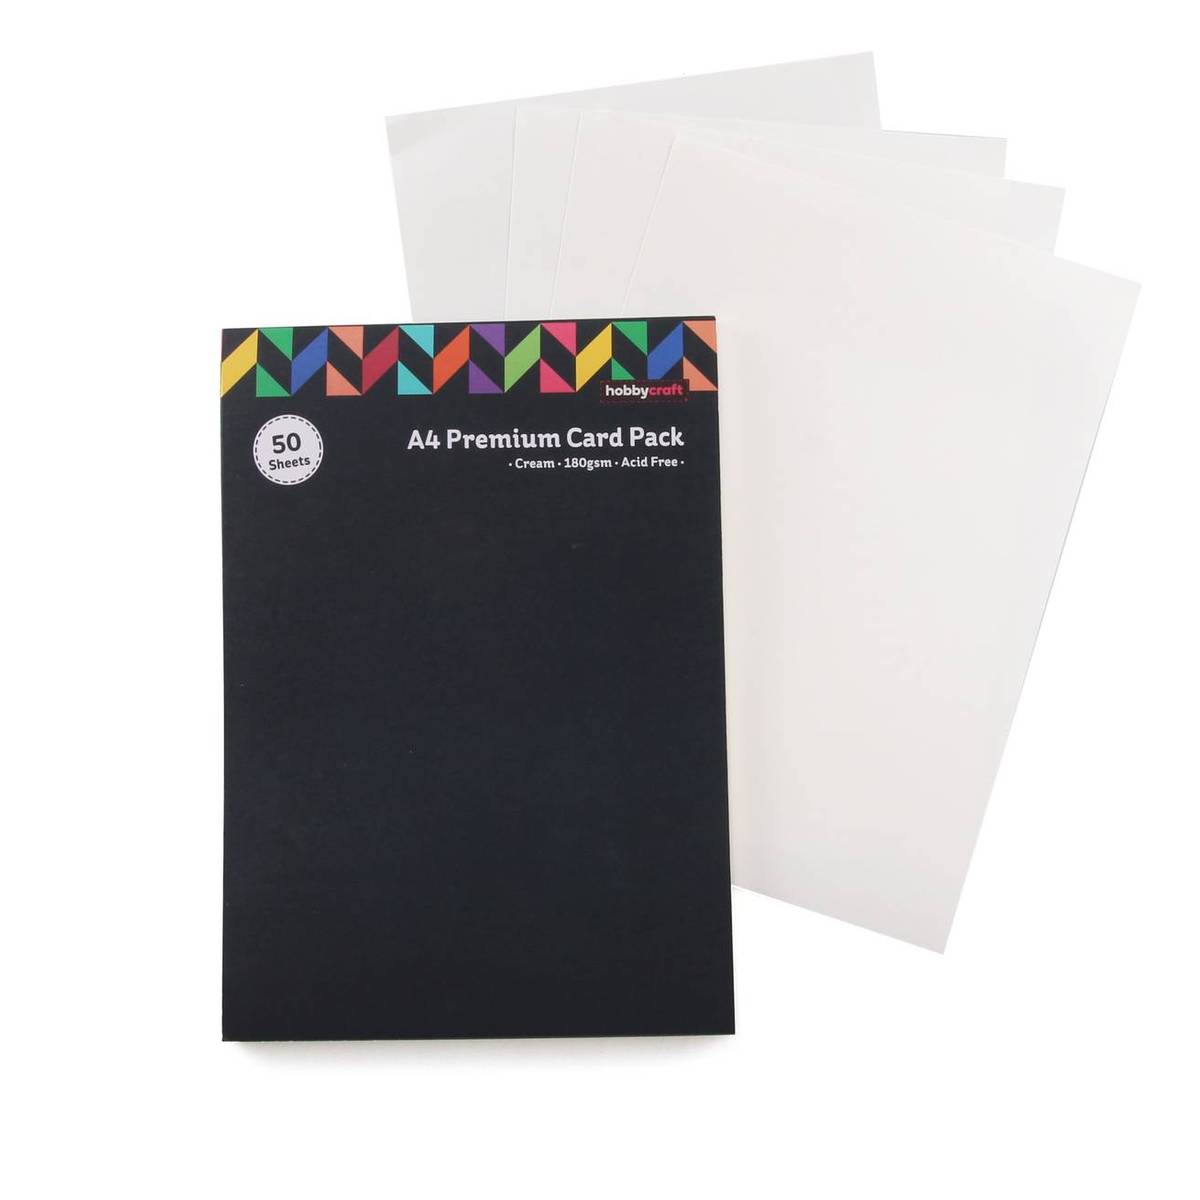 Buy White Premium Smooth Paper A4 100 Pack for GBP 5.80 | Hobbycraft UK